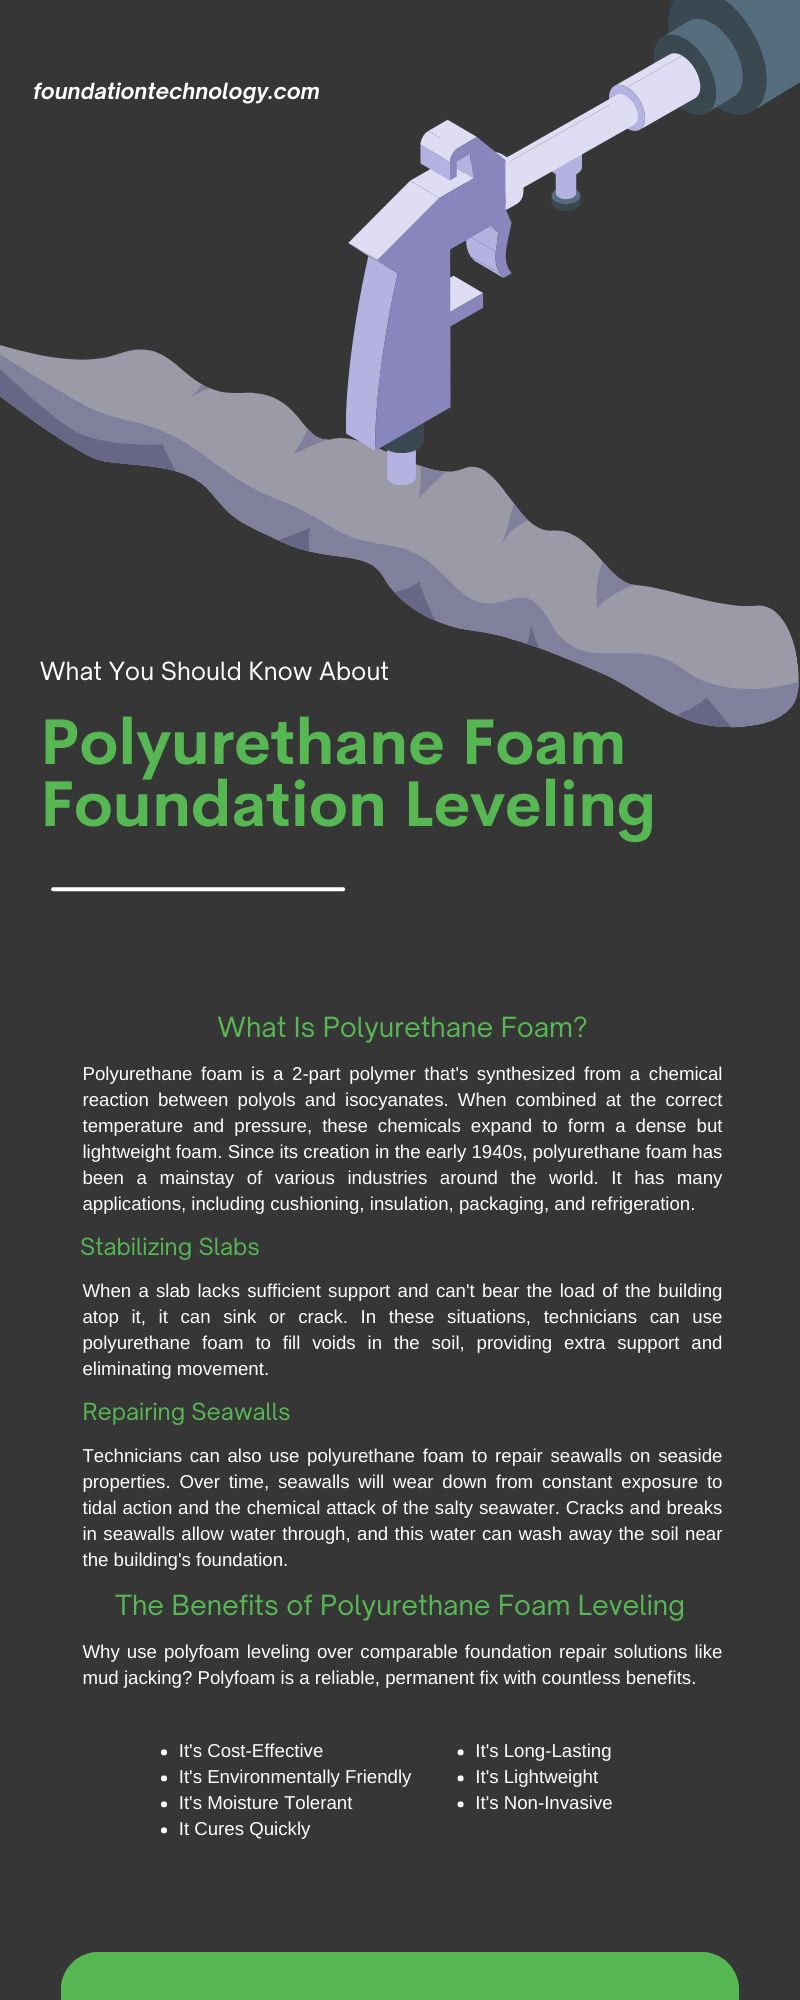 What You Should Know About Polyurethane Foam Foundation Leveling